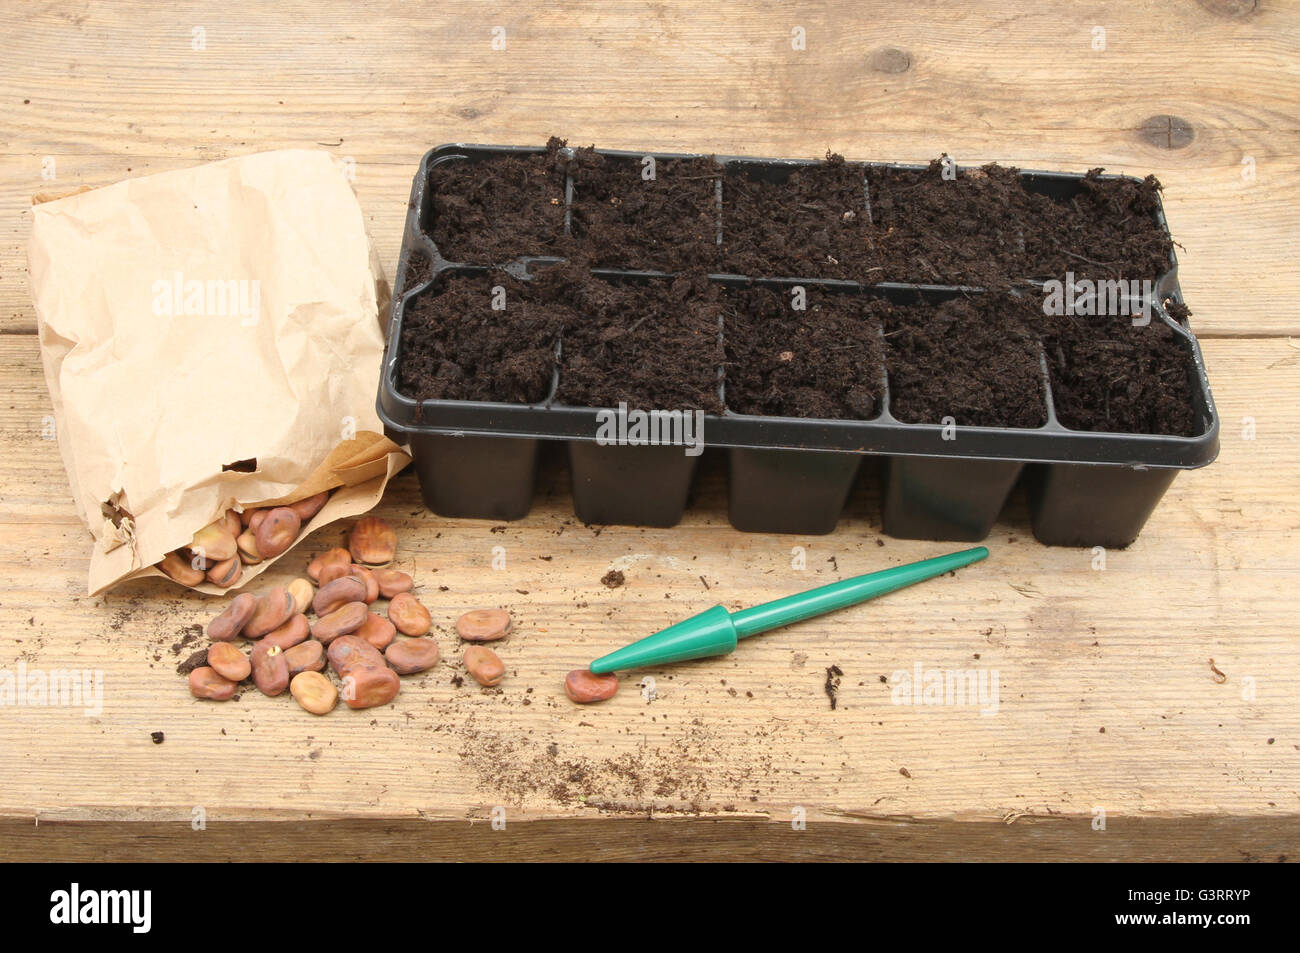 Broad bean seeds and a modular seed tray on a wooden potting bench Stock Photo